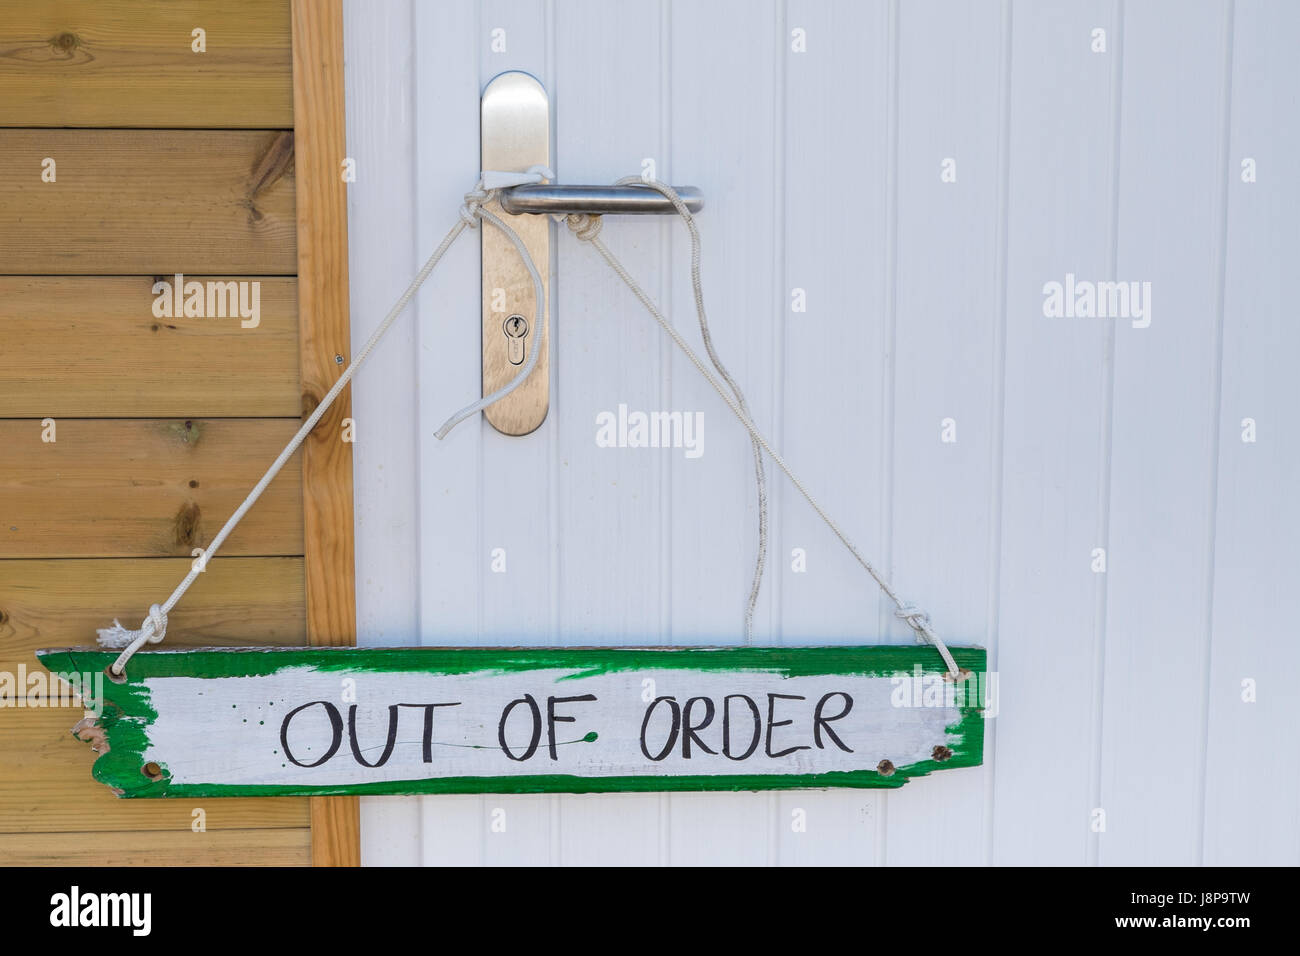 Out of order sign Stock Photo